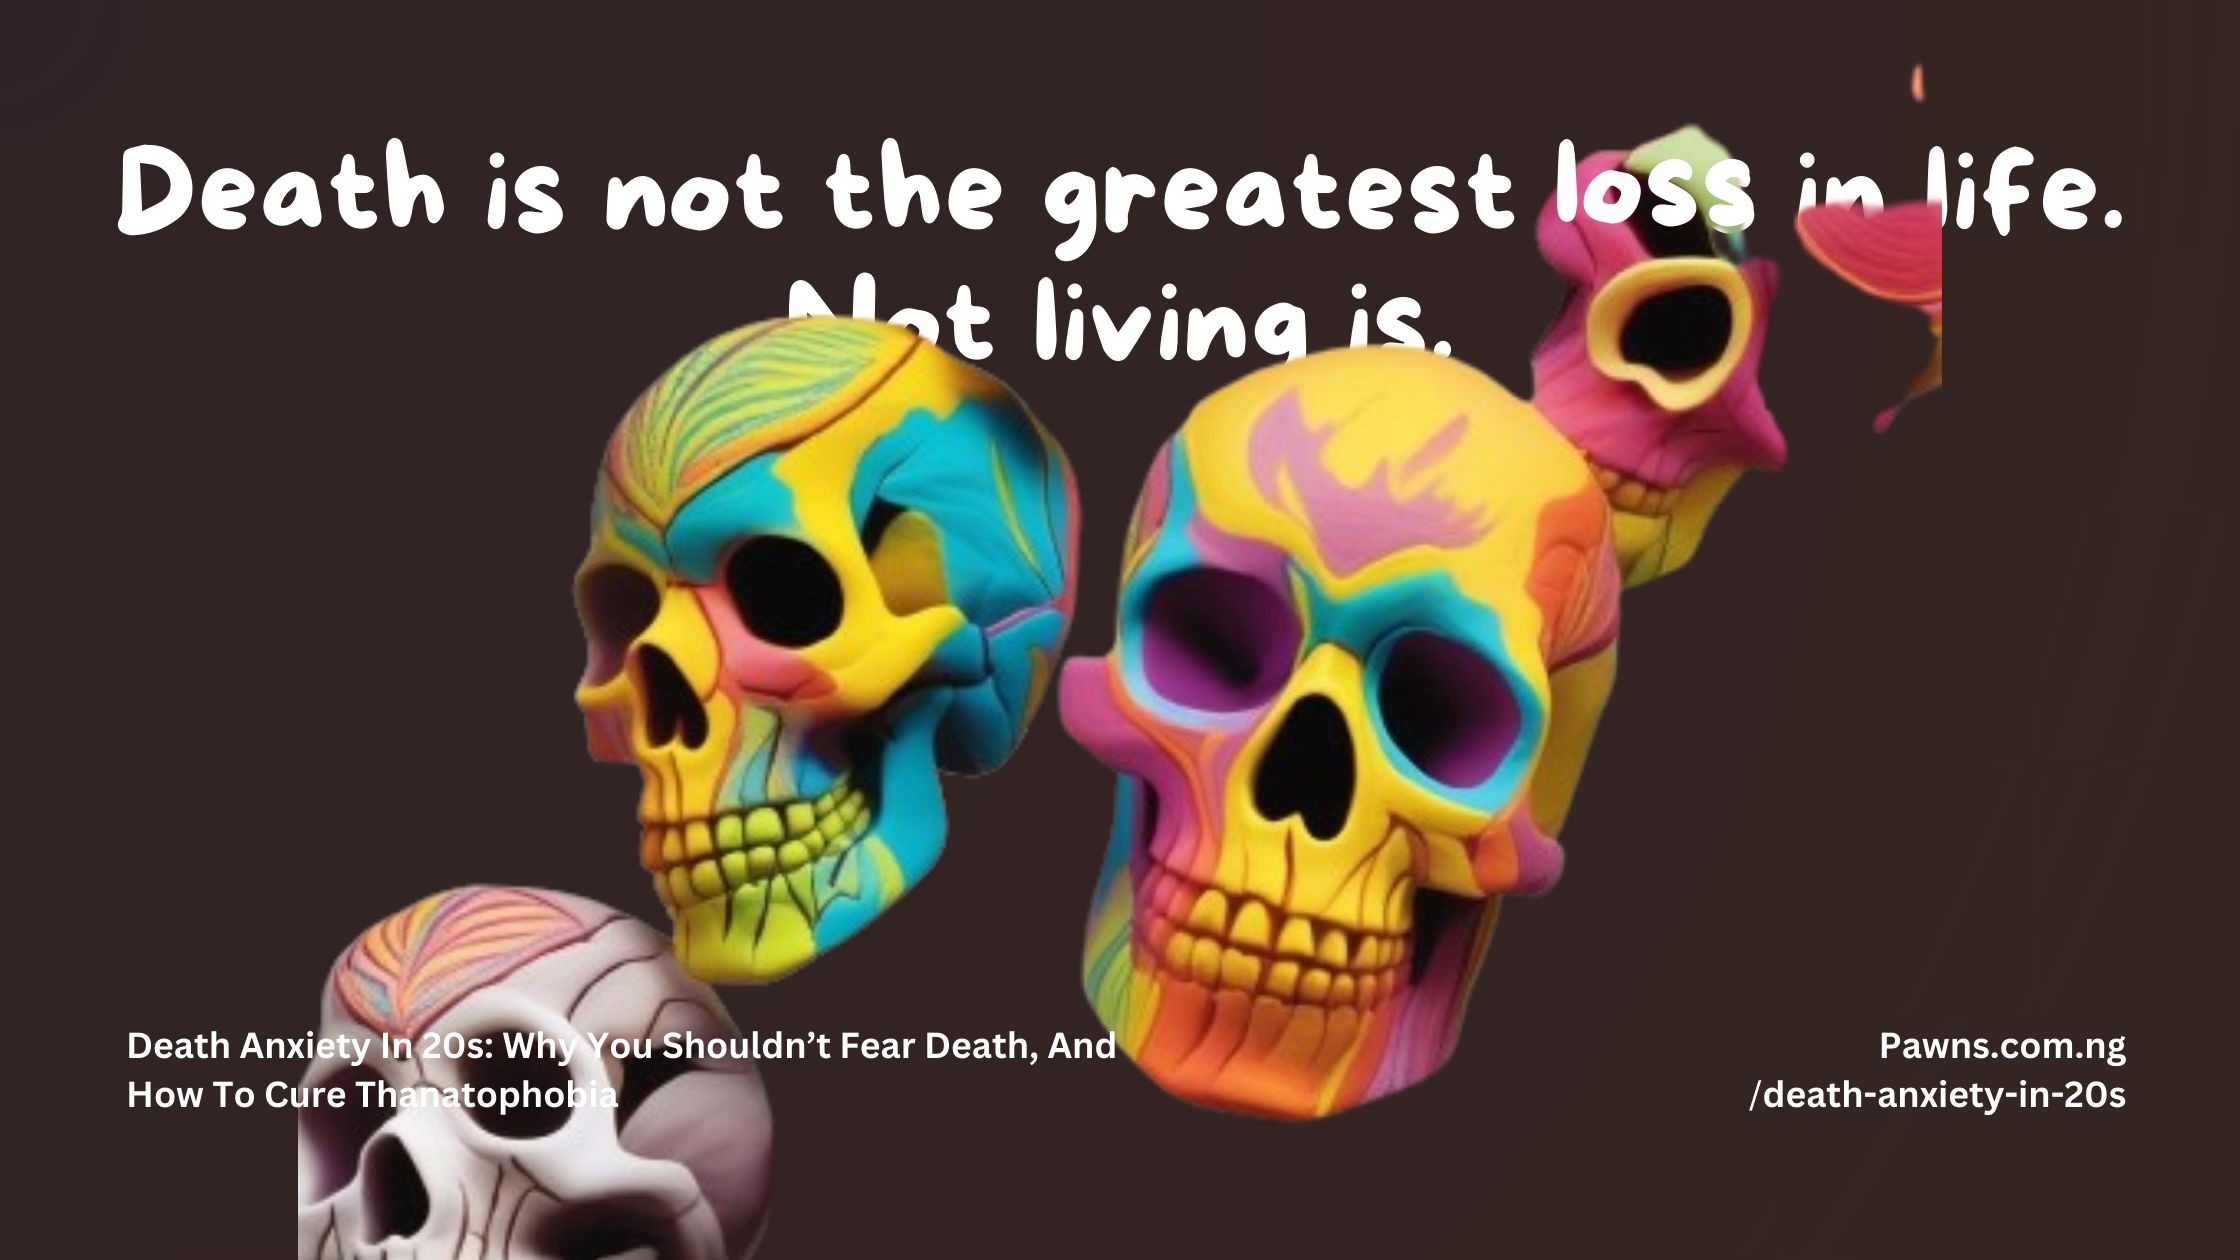 Death is not the greatest loss in life. Not living is. Death Anxiety In 20s Why You Shouldn’t Fear Death, And How To Cure Thanatophobia